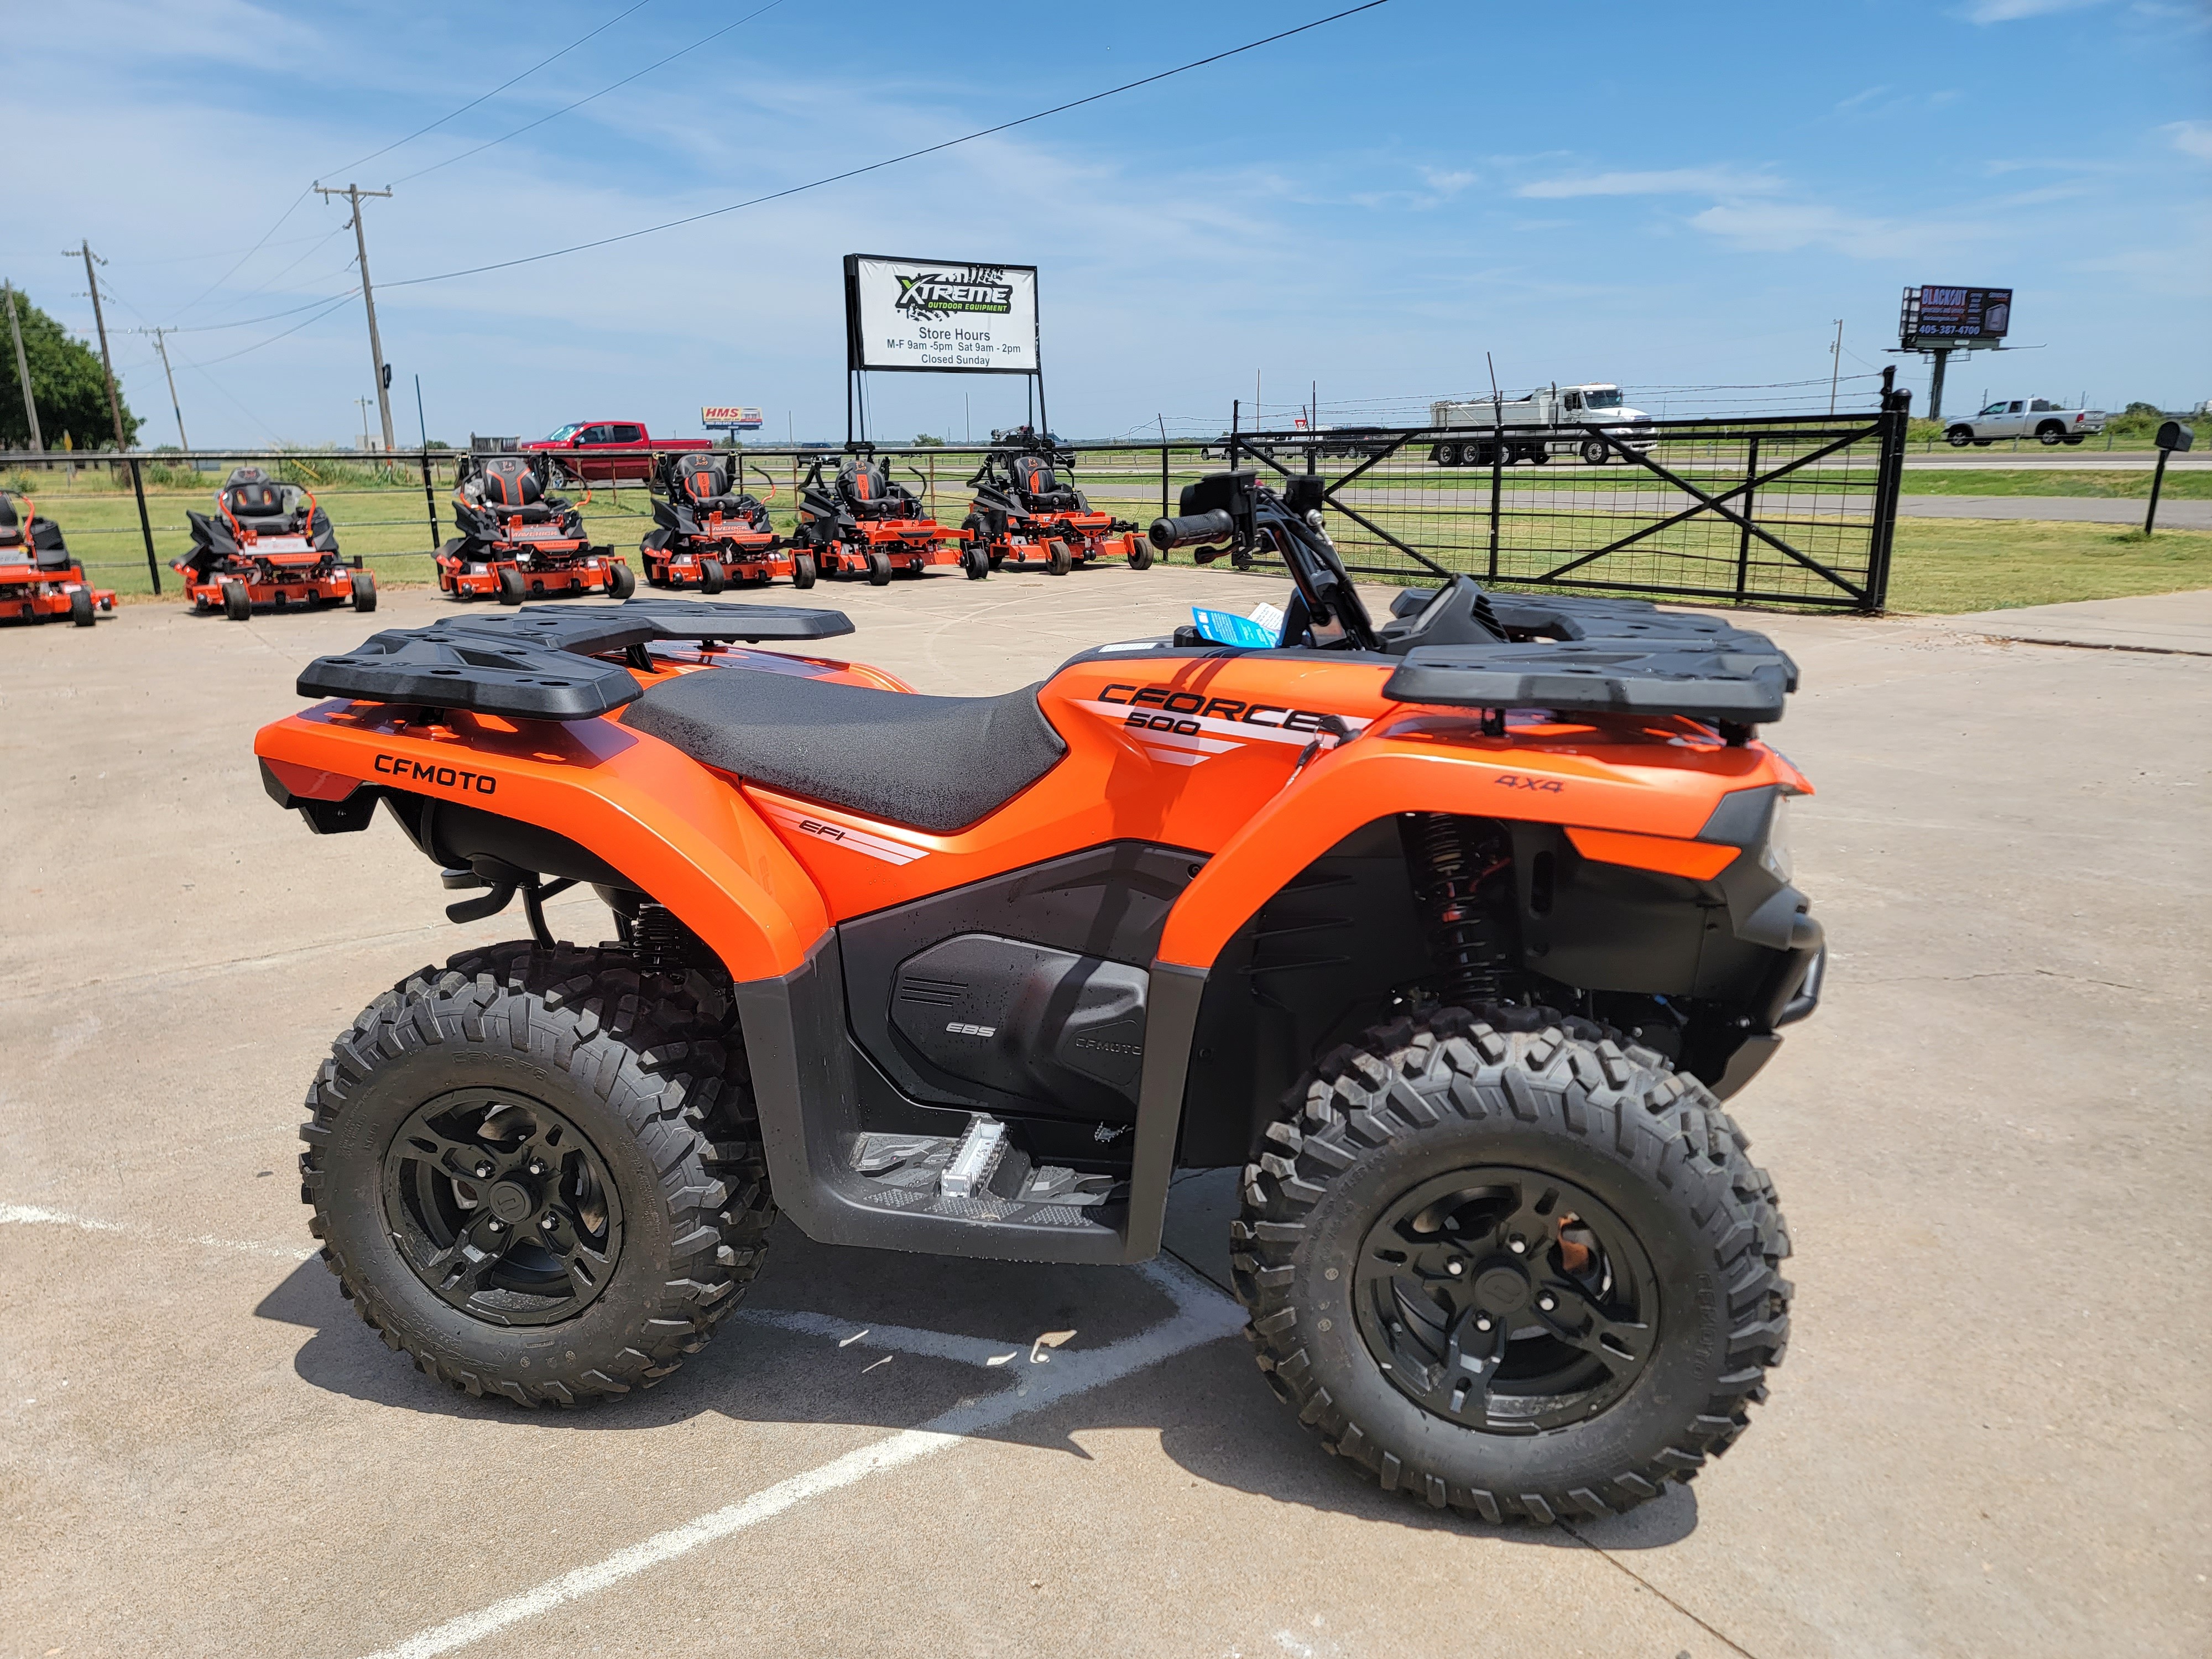 2023 CFMOTO CFORCE 500 at Xtreme Outdoor Equipment